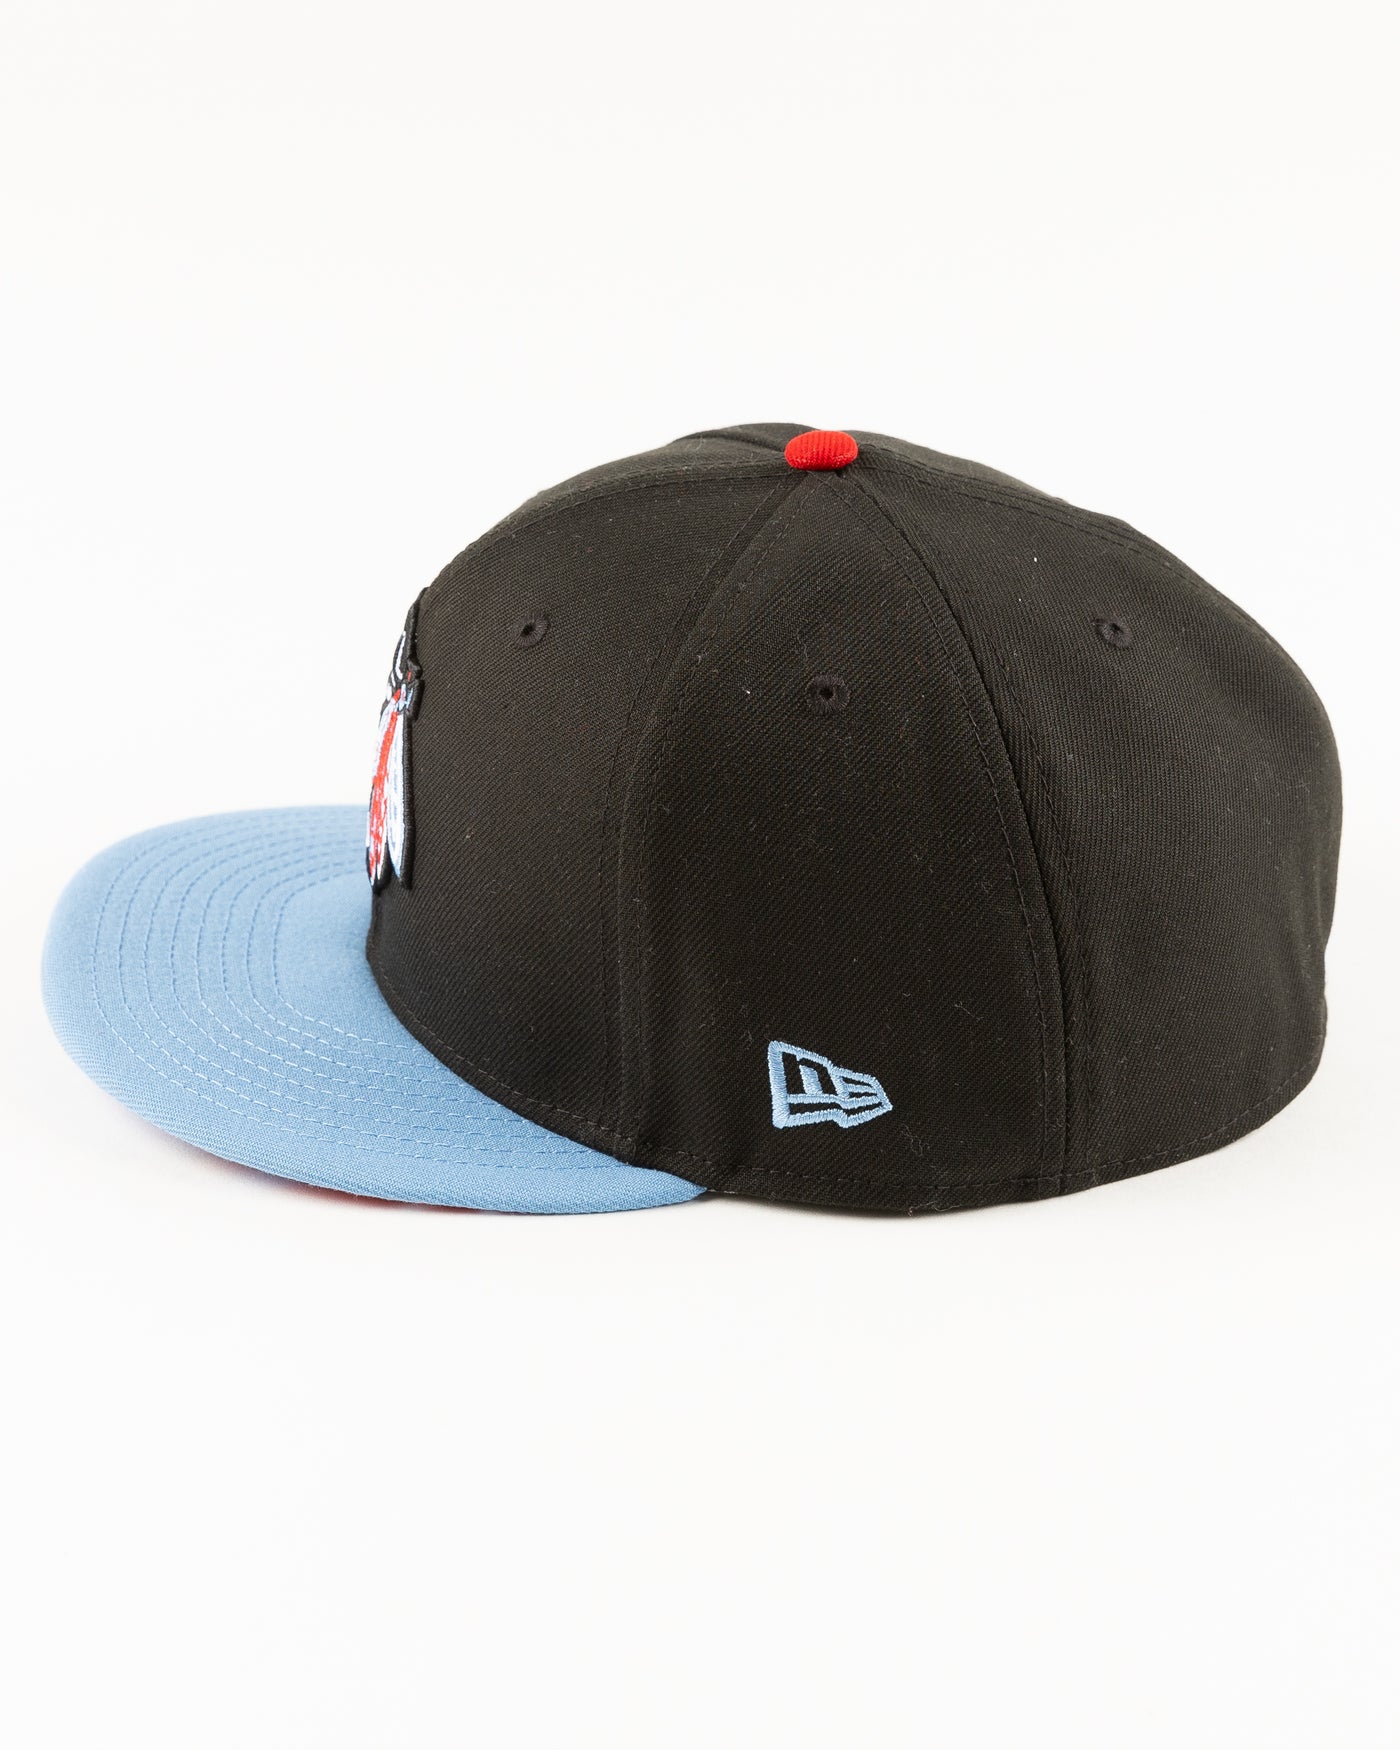 black and blue New Era fitted cap with tonal Chicago Blackhawks primary logo on front - left side lay flat